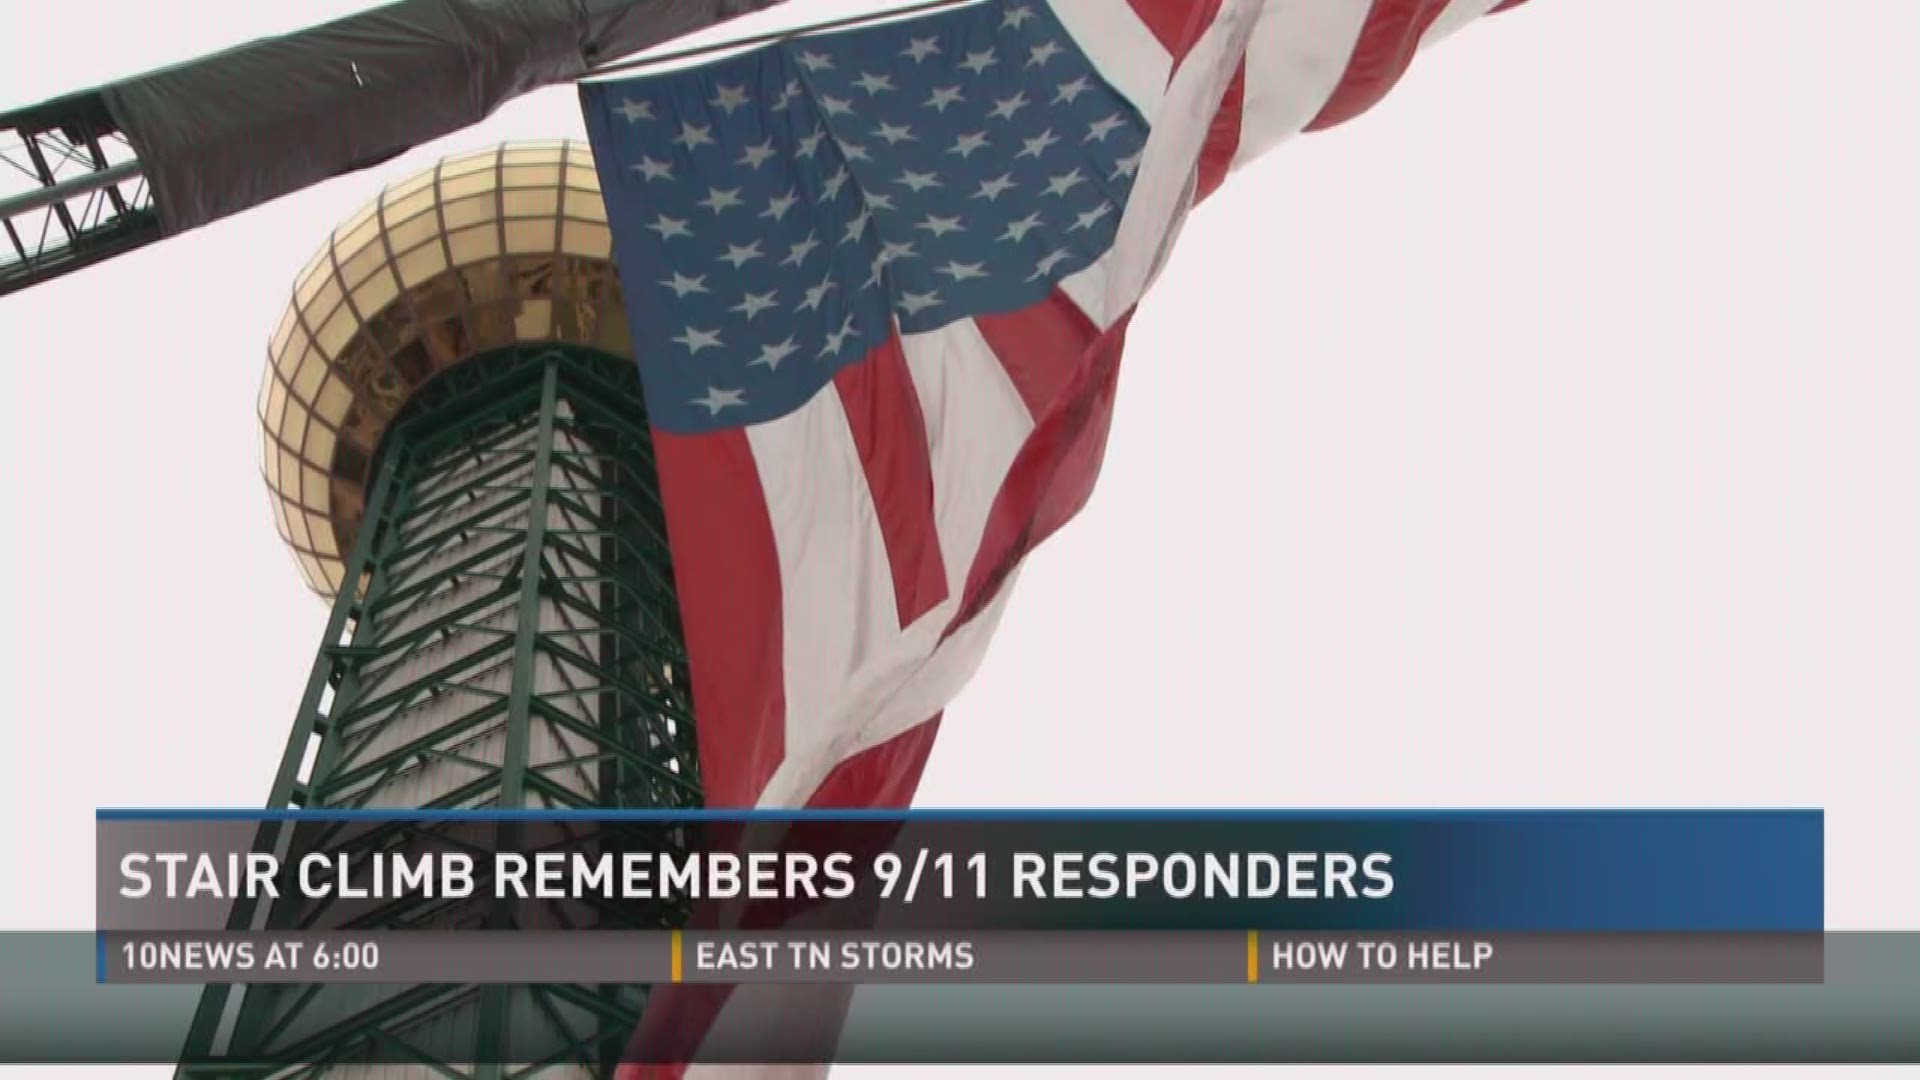 Local emergency crews remembered first responders who died in the attacks with the annual 9/11 stair climb at the Sunsphere. Each participant has the name of one of the victims.